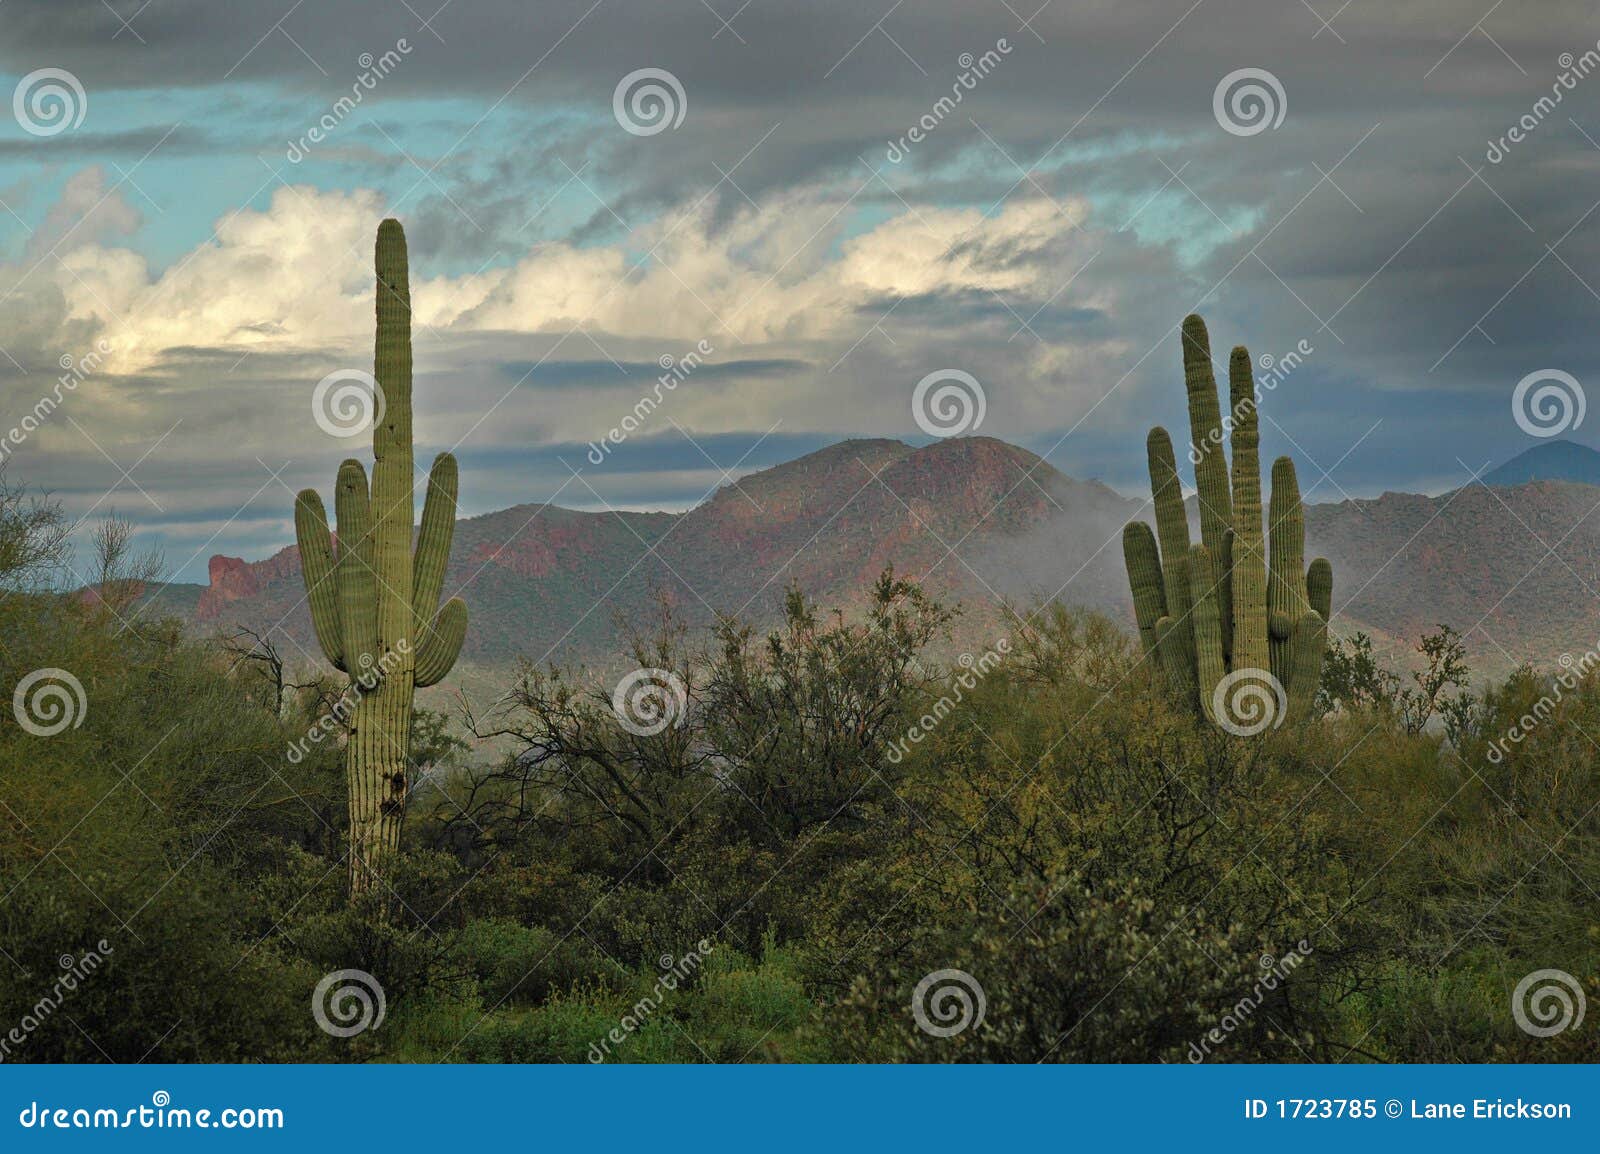 saguaro cactus and superstition mountains 2